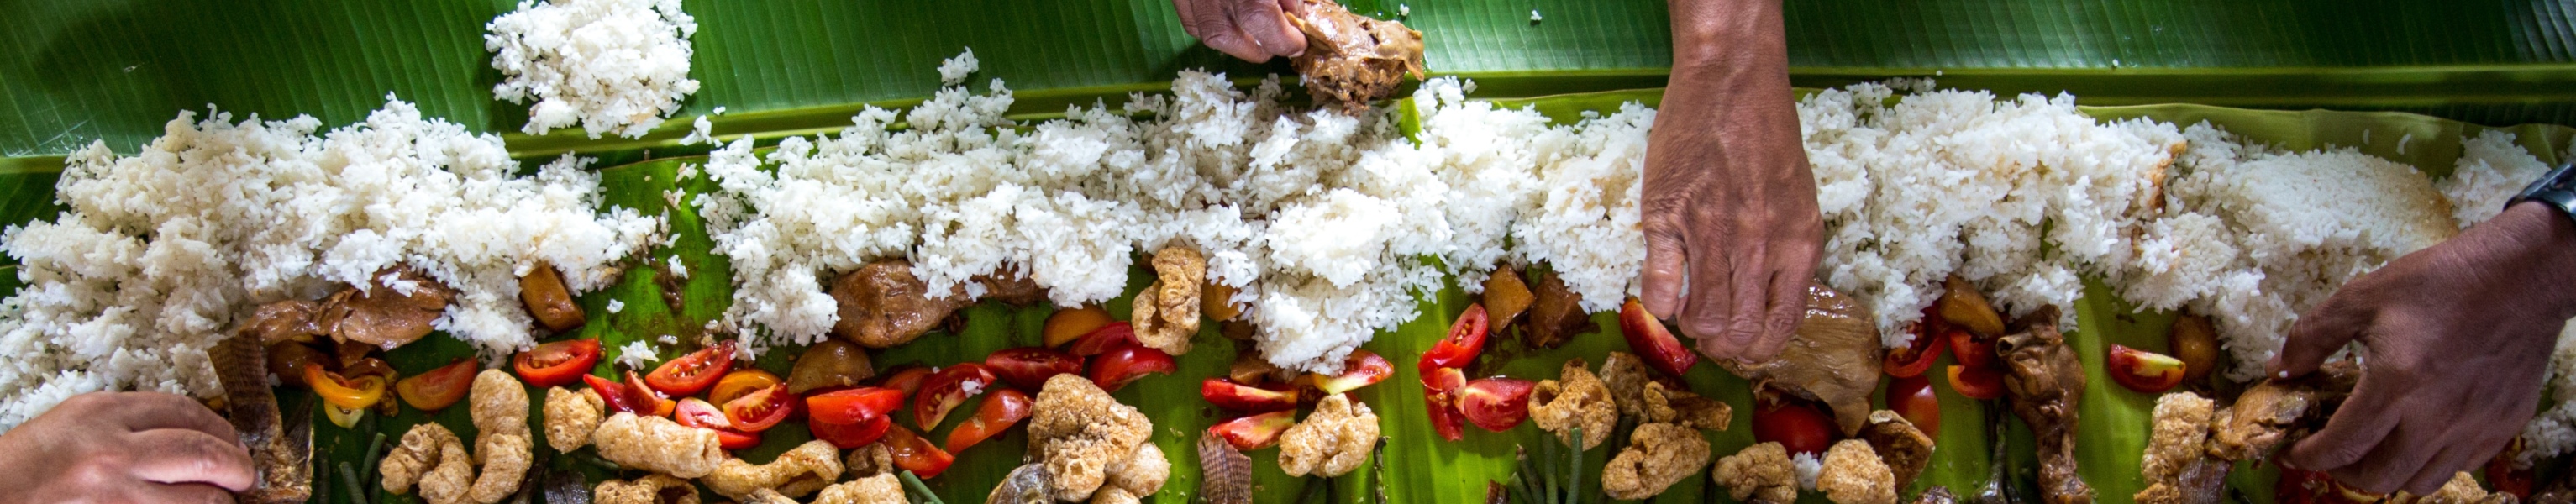 A meal of rice in the Philippines by Avel Chuklanov/Unsplash